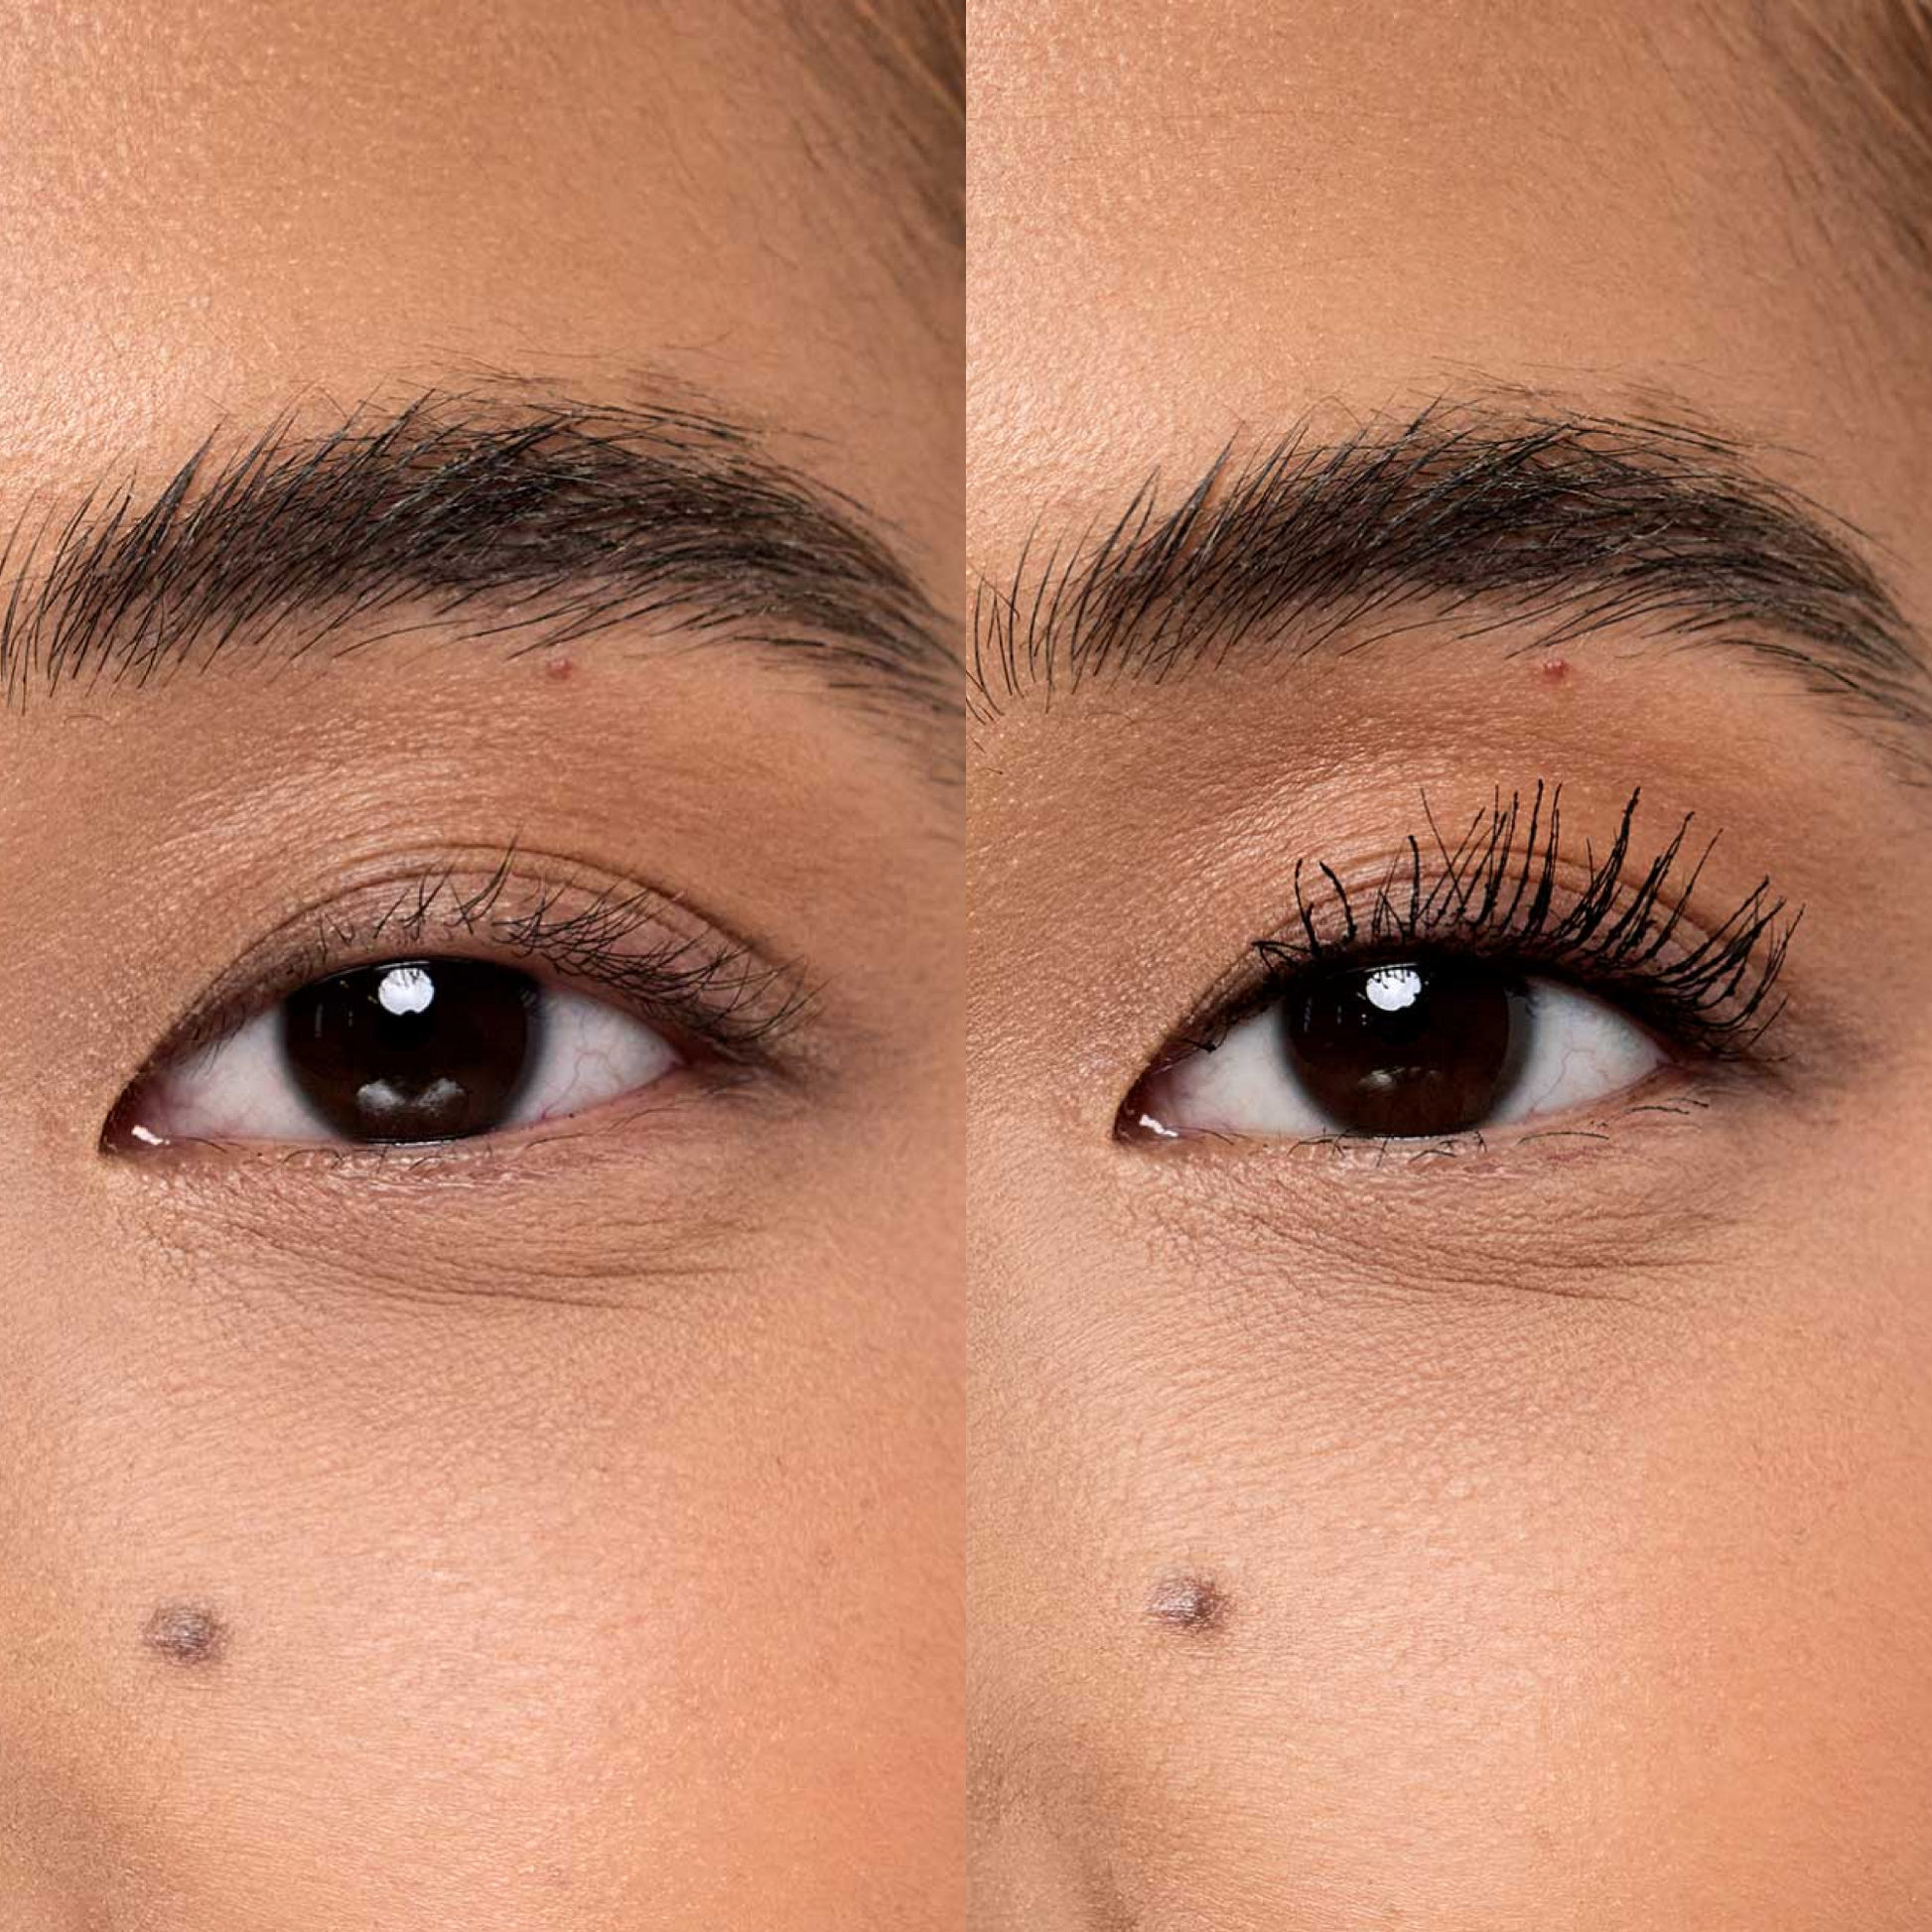 [Shared: A close up of a model's eyelashes before and after applying the Tower 28 Beauty MakeWaves™ Mascara in Jet. Lashes are visibly lifted and lengthened. Mini